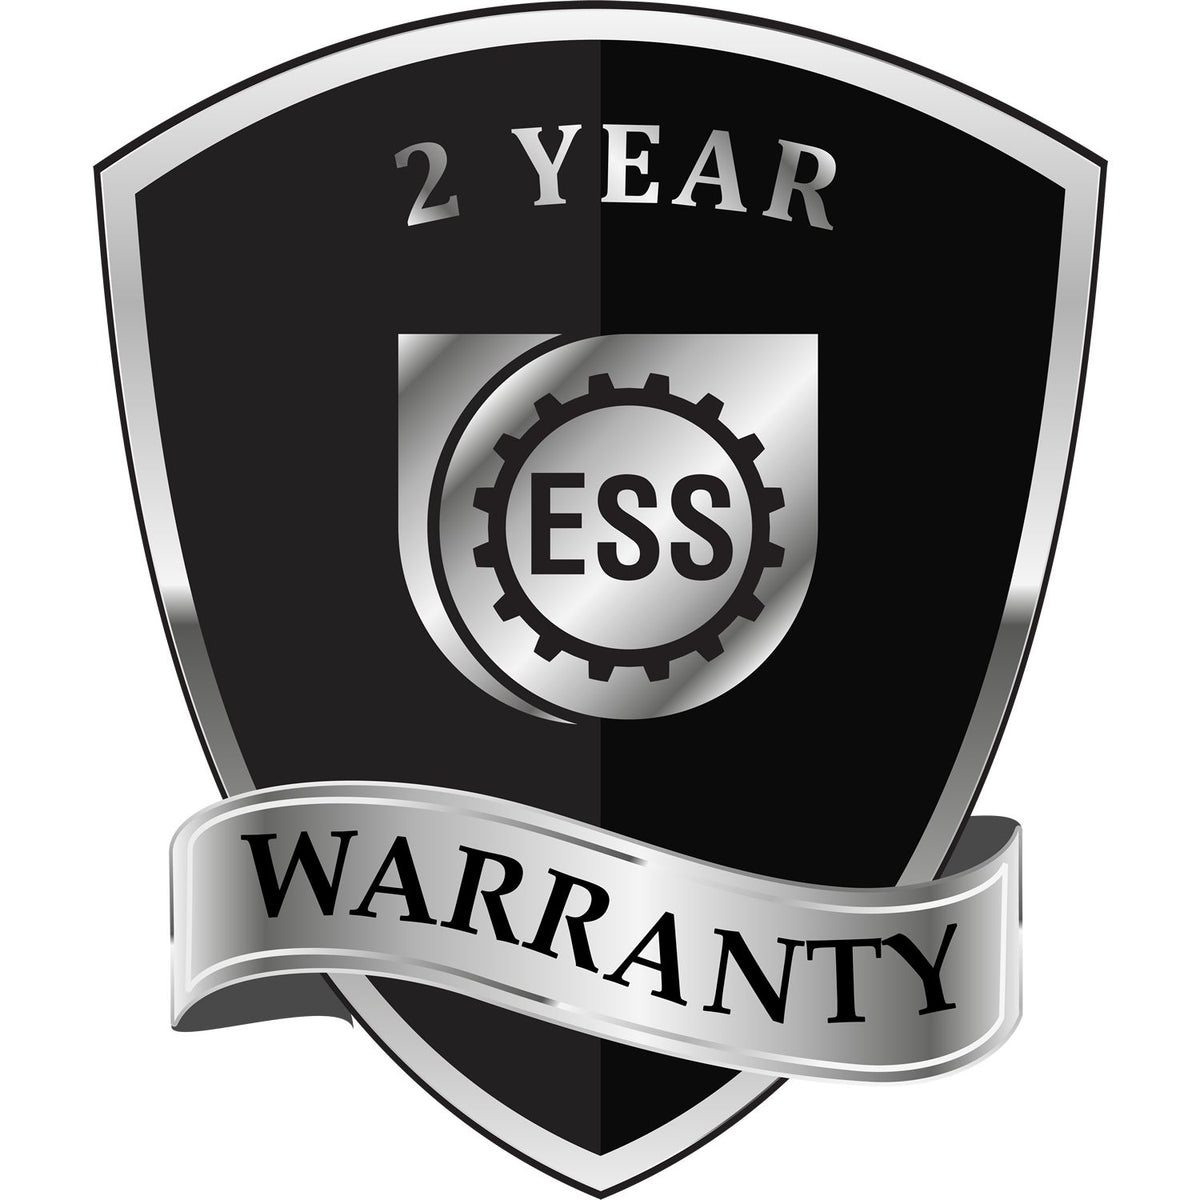 A black and silver badge or emblem showing warranty information for the Hybrid New York Geologist Seal